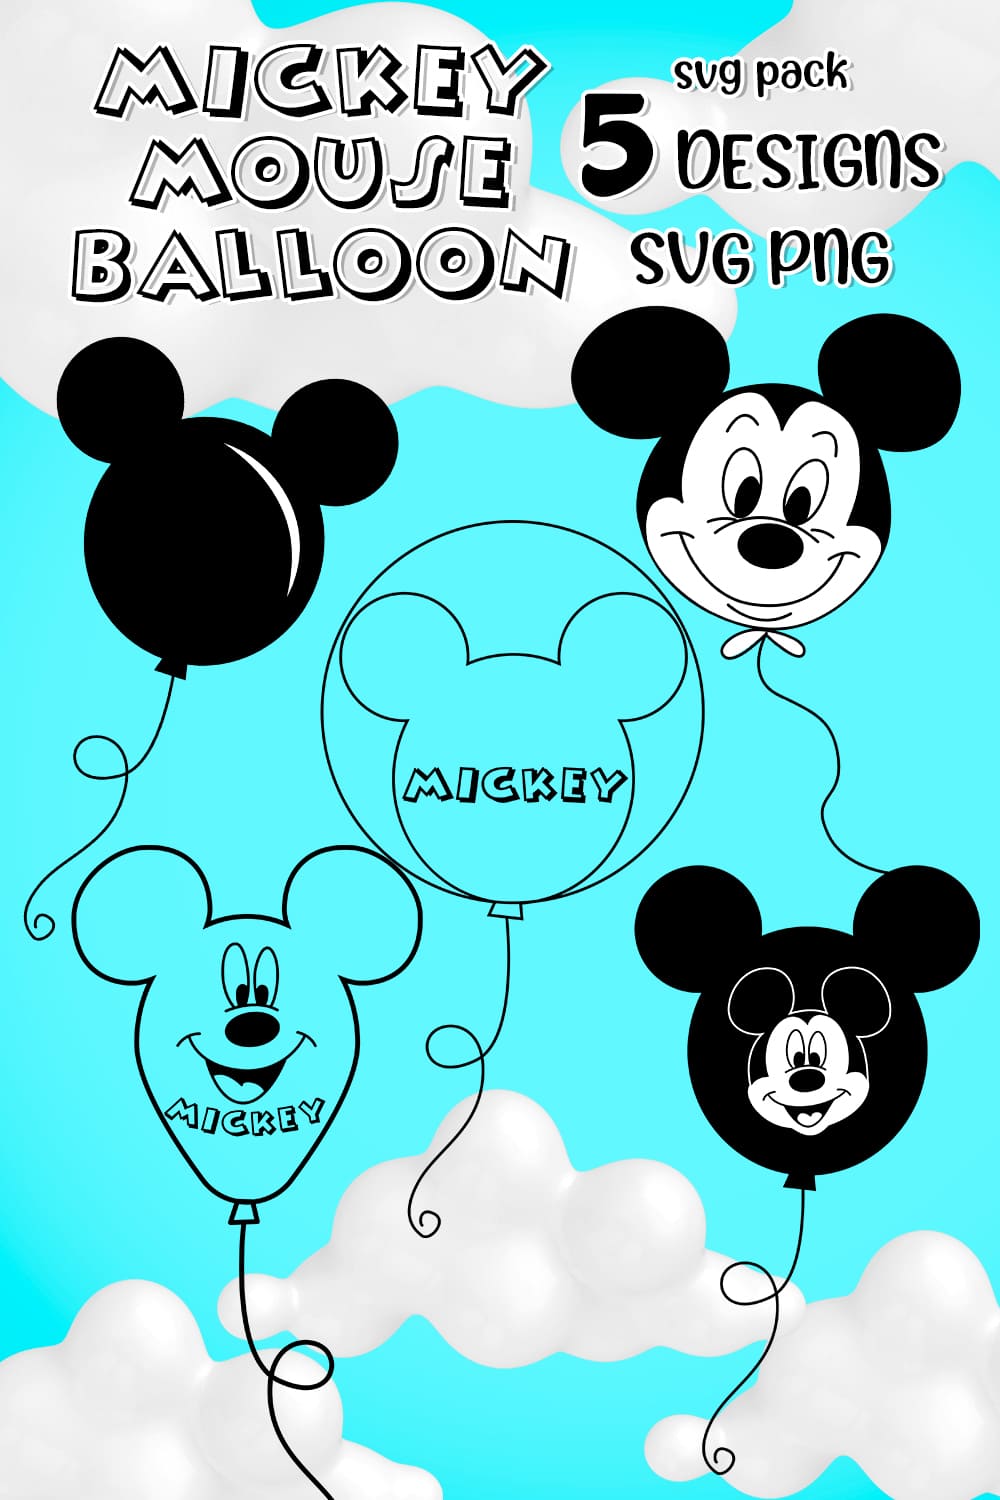 Mickey Mouse Balloon SVG - pinterest image preview.